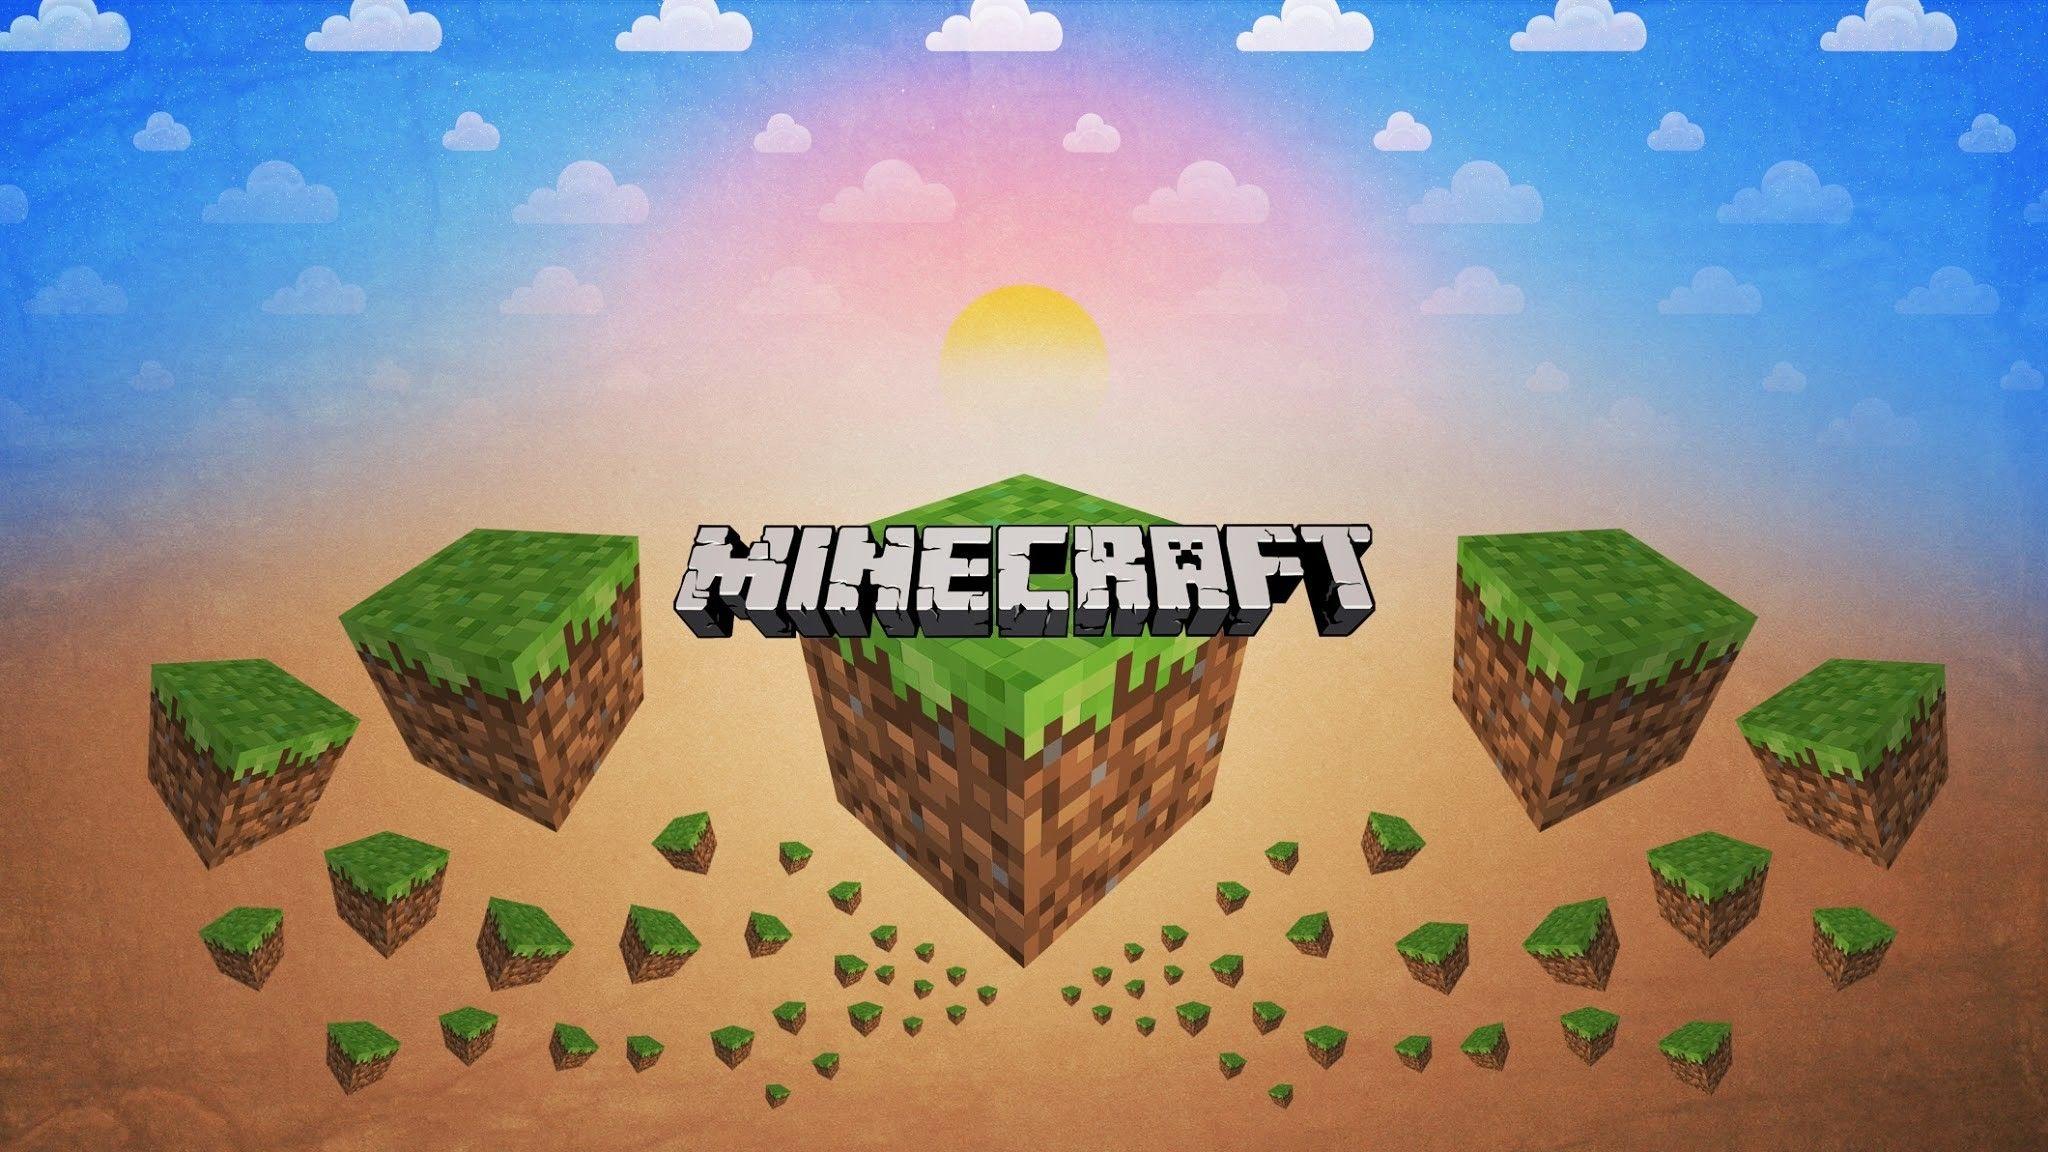 2048x1152 Minecraft Wallpapers Top Free 2048x1152 Minecraft Backgrounds Wallpaperaccess - channel art roblox youtube banner 2048x1152